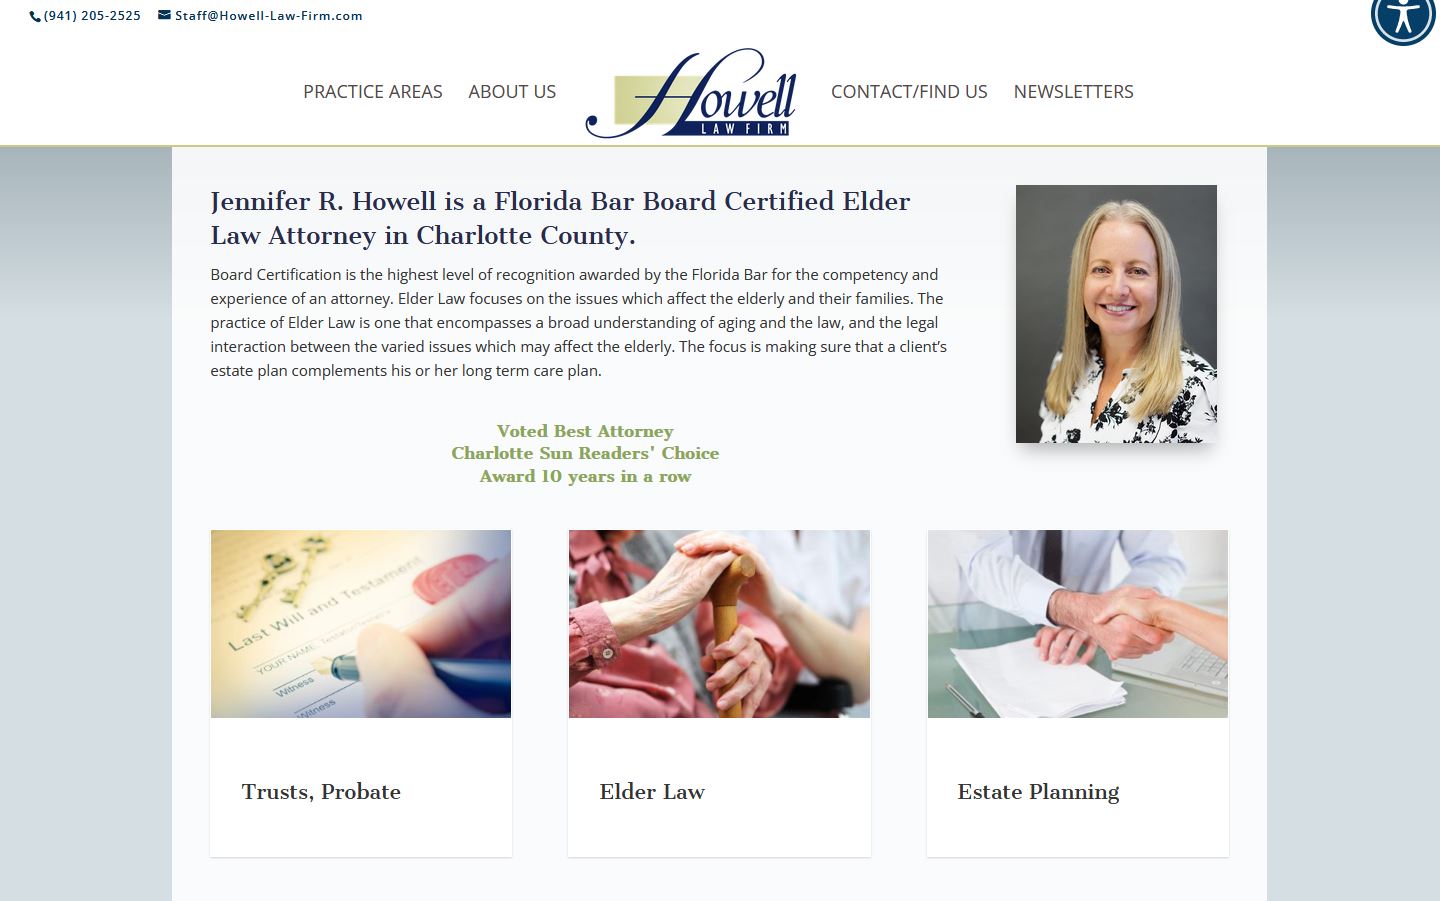 Home page of Howell Law Firm